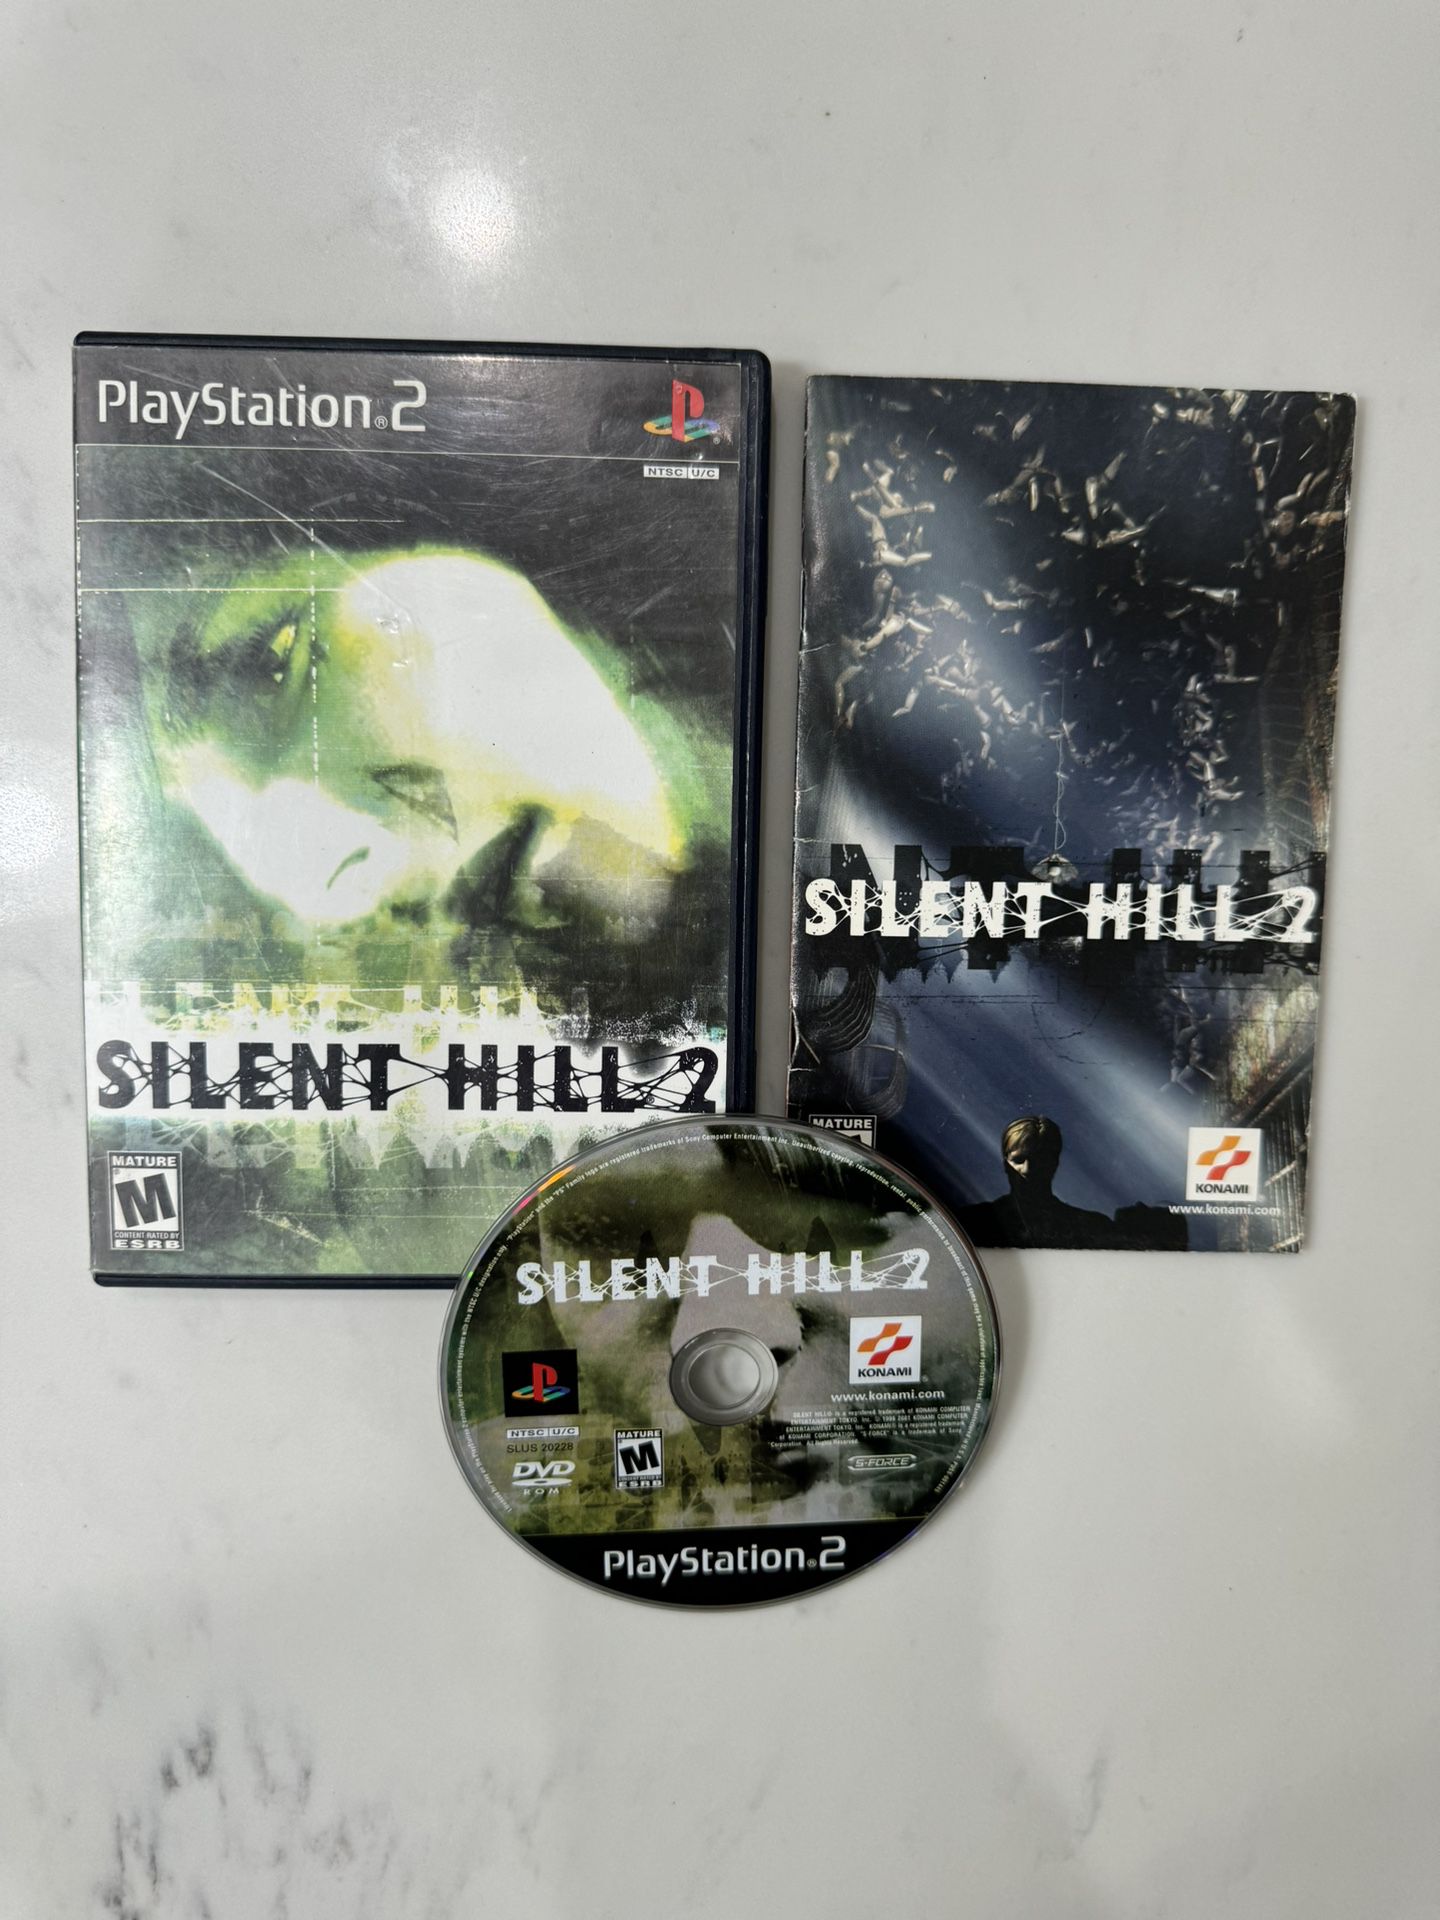 Silent Hill 2 Scratch-Less Disc for PlayStation 2 PS2 GAME